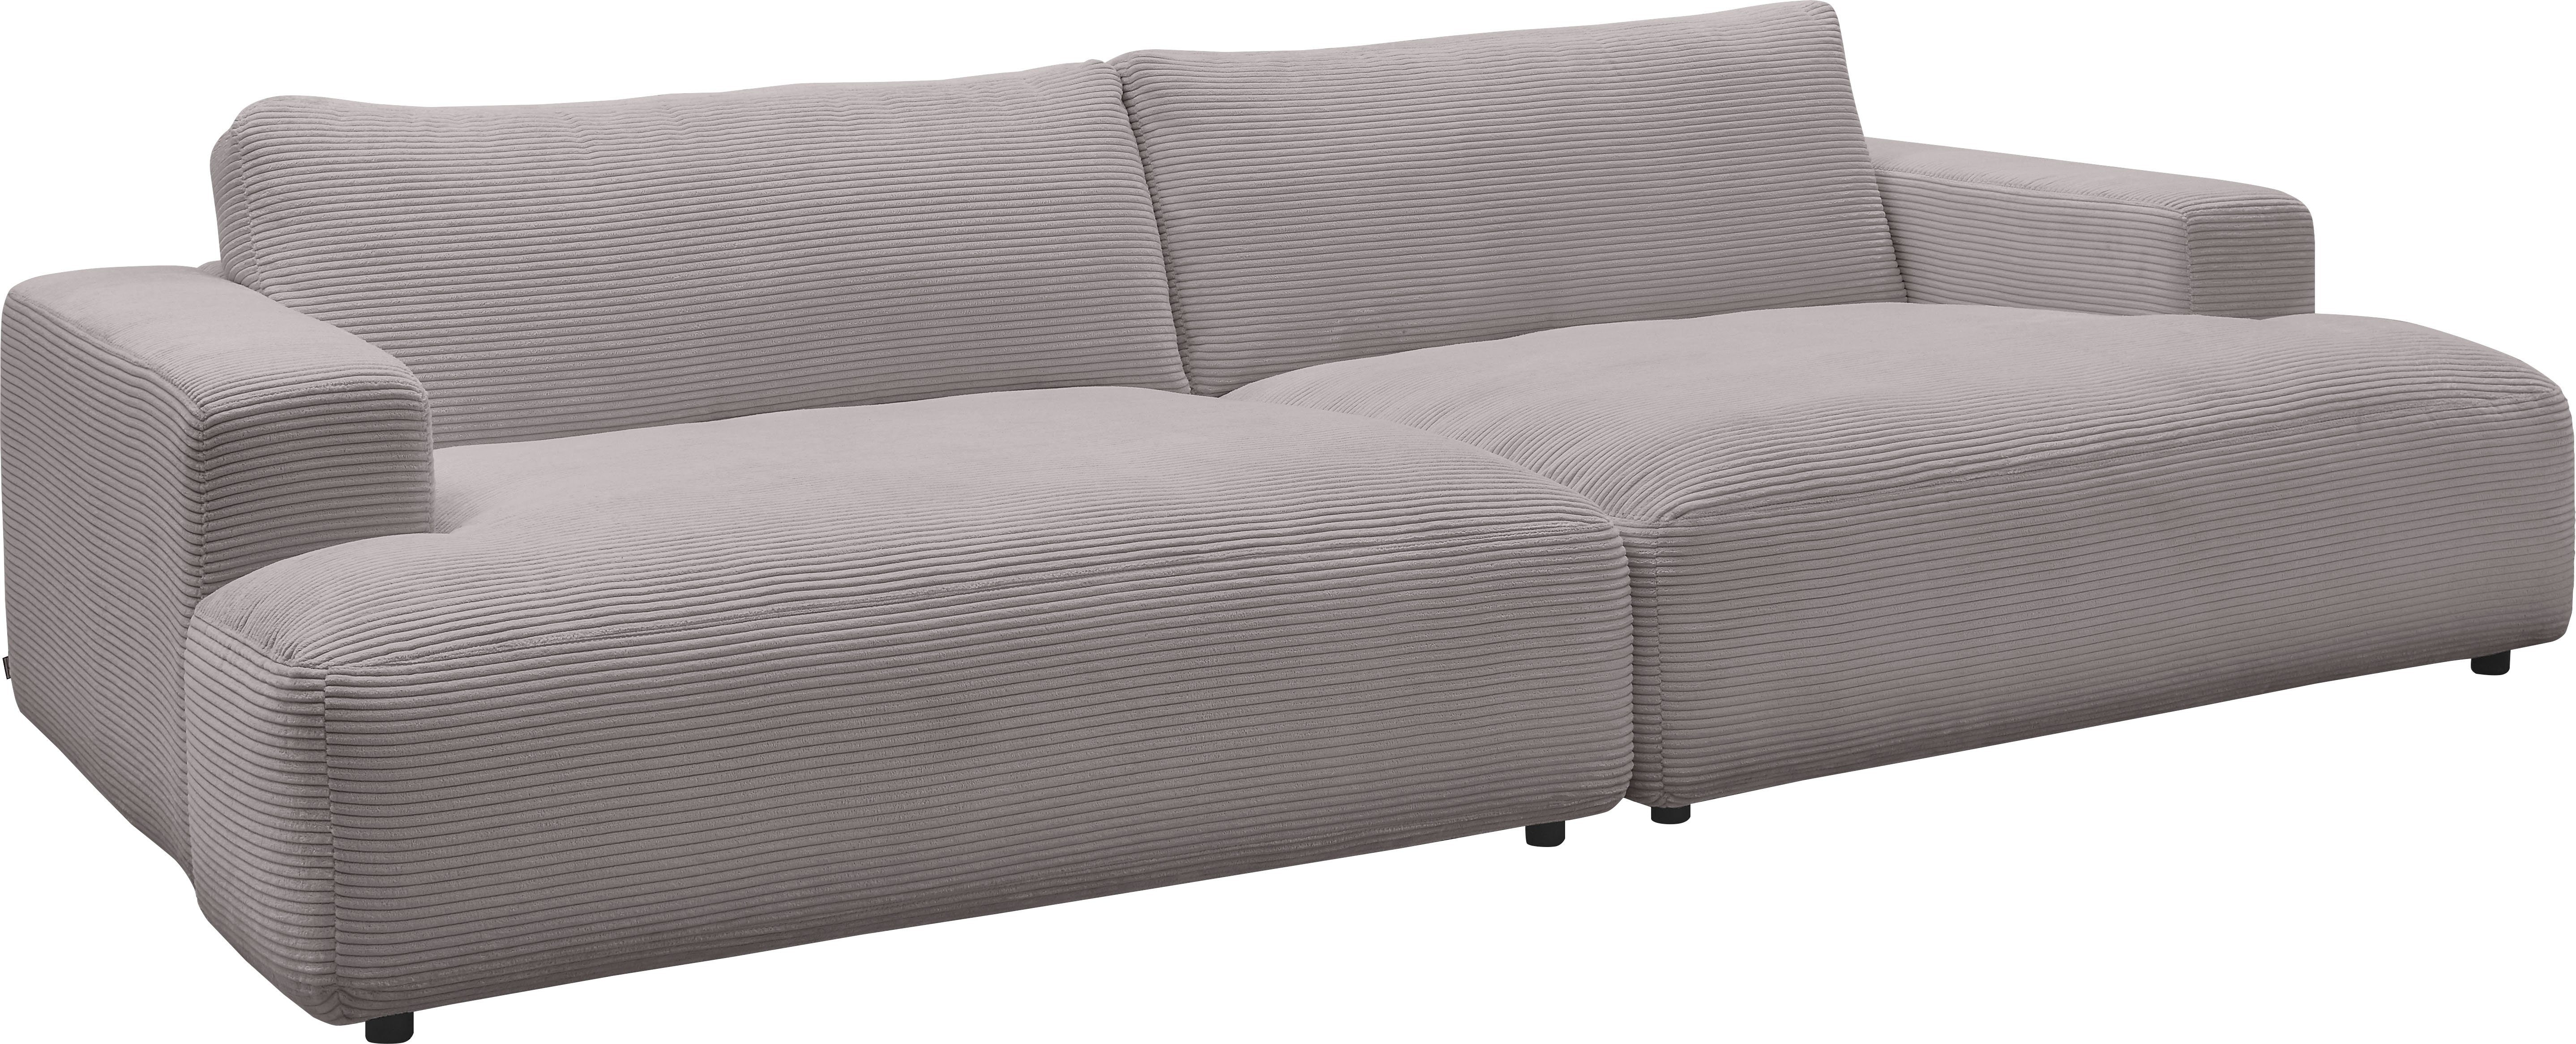 Loungesofa GALLERY 292 M Musterring Breite cm by Lucia, branded grey Cord-Bezug,